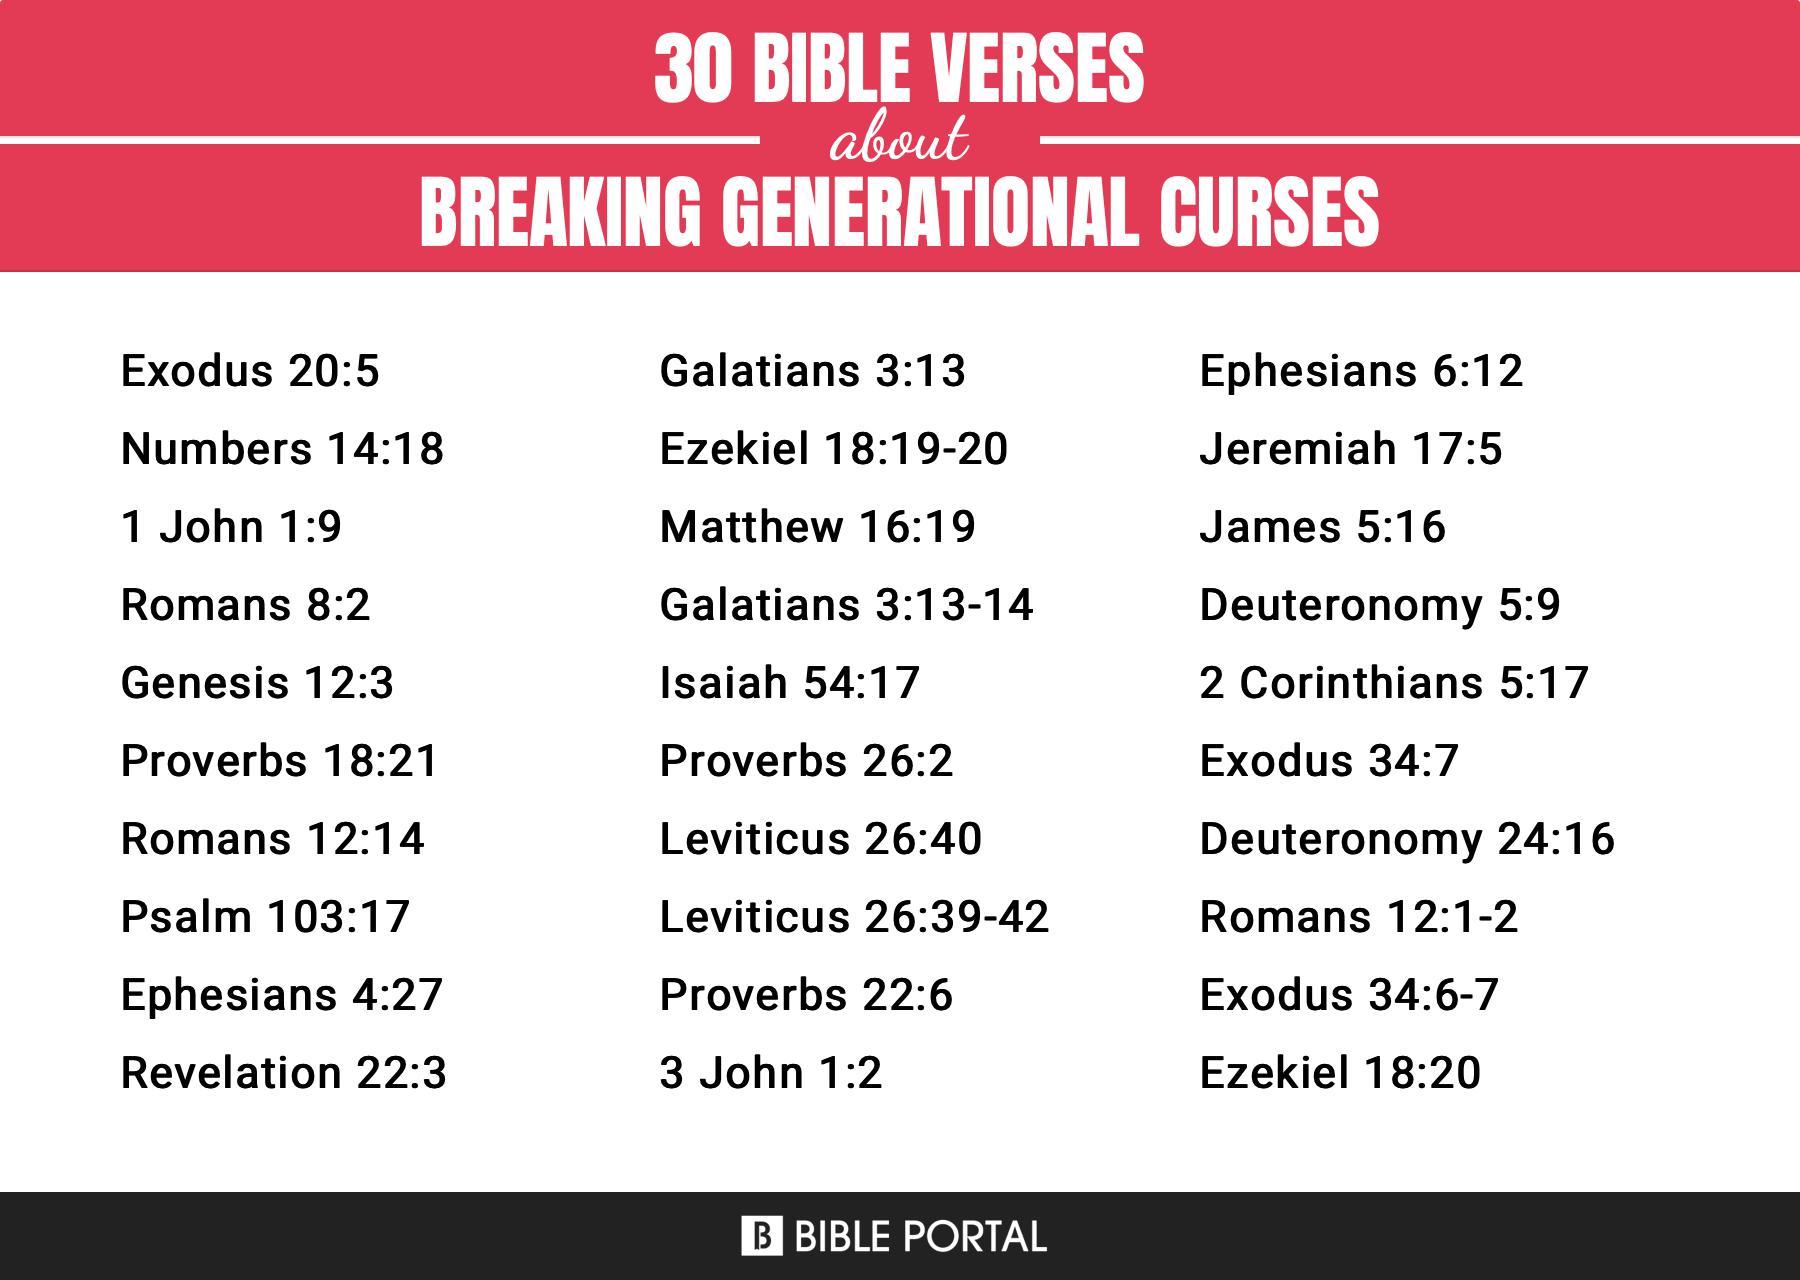 75 Bible Verses about Breaking Generational Curses